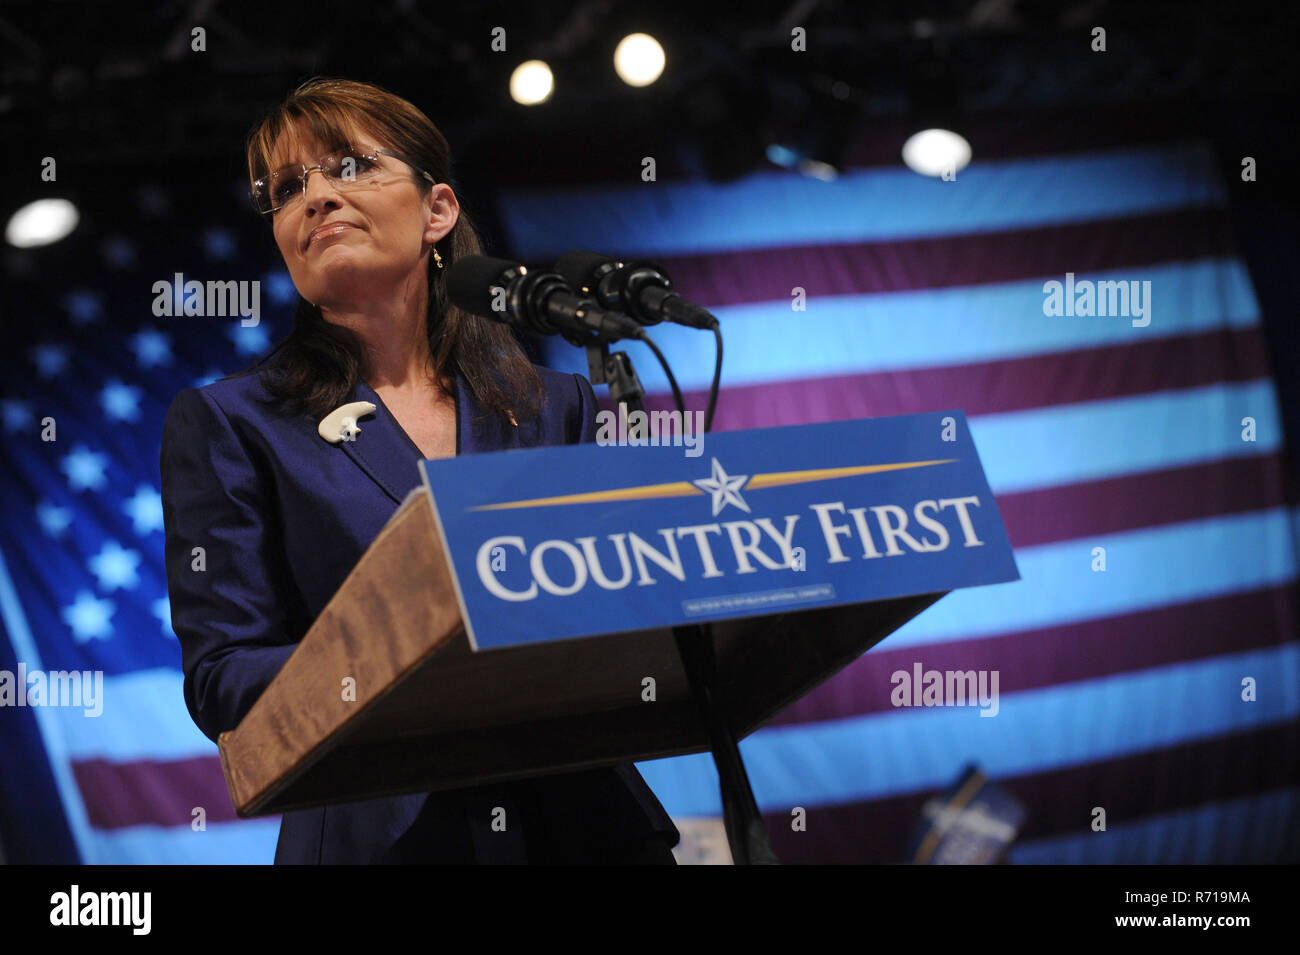 Sarah Palin addresses supporters at the Road to Victory Rally at the Riverfront Sports Complex in Scranton, Pennsylvania. October 14, 2008.  Credit: Dennis Van Tine/MediaPunch Stock Photo